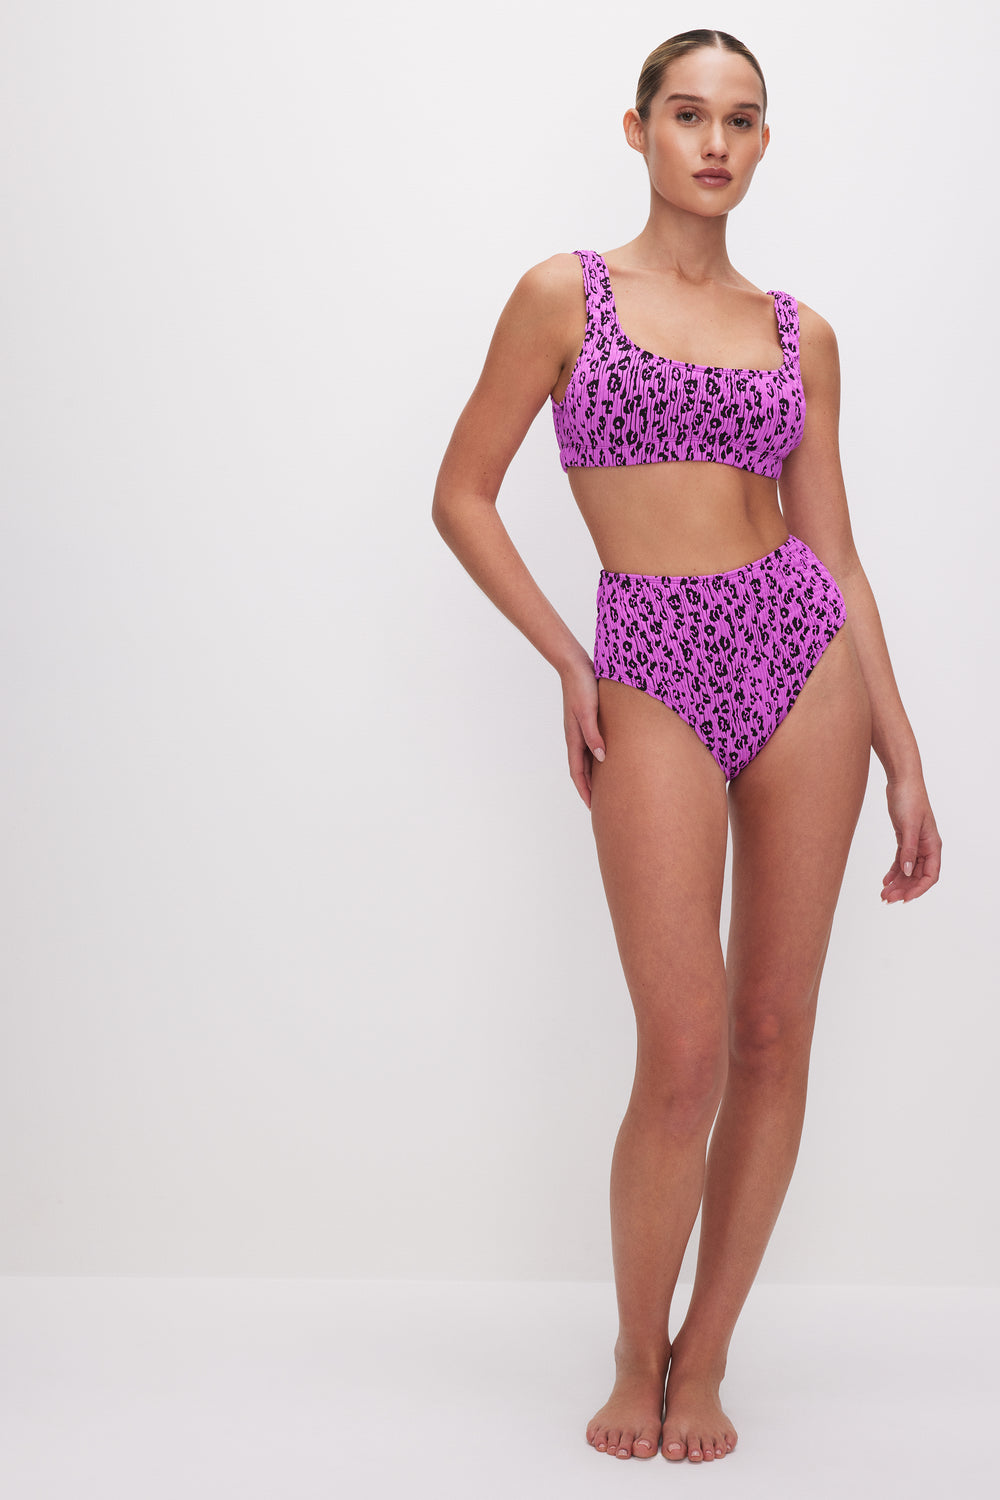 The Good American Always Fits Swim line addresses fluctuating bodies